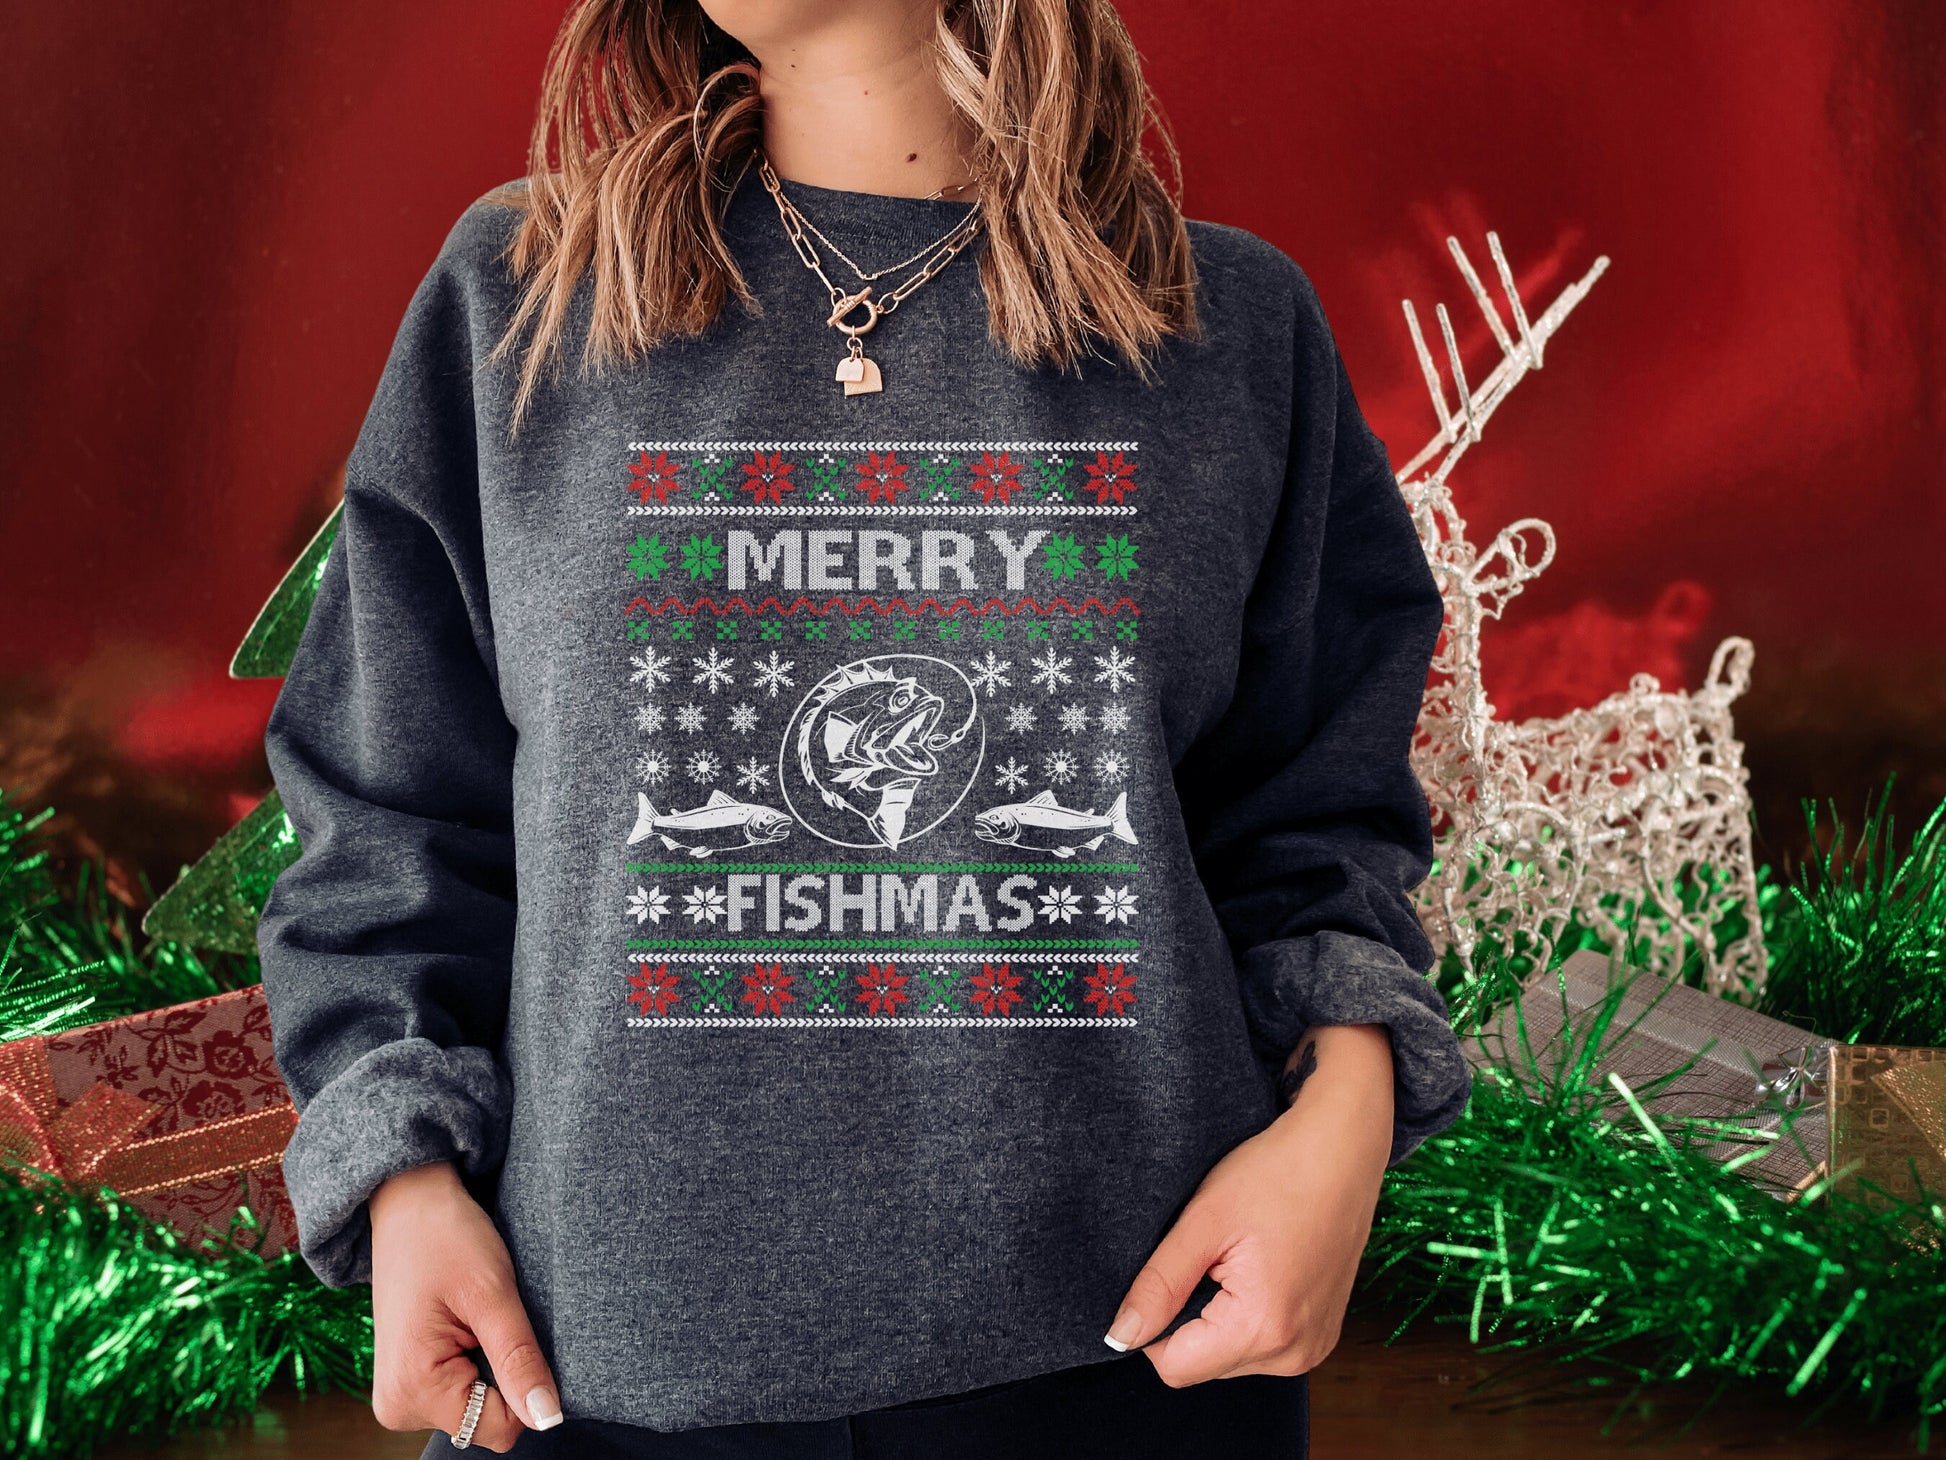 Fishing Gifts for Men, Ugly Christmas Sweater for Men, Merry Fishmas Ugly Christmas Sweater, Merry Fishmas Fishing Ugly Christmas Sweater - Mardonyx Maroon / S